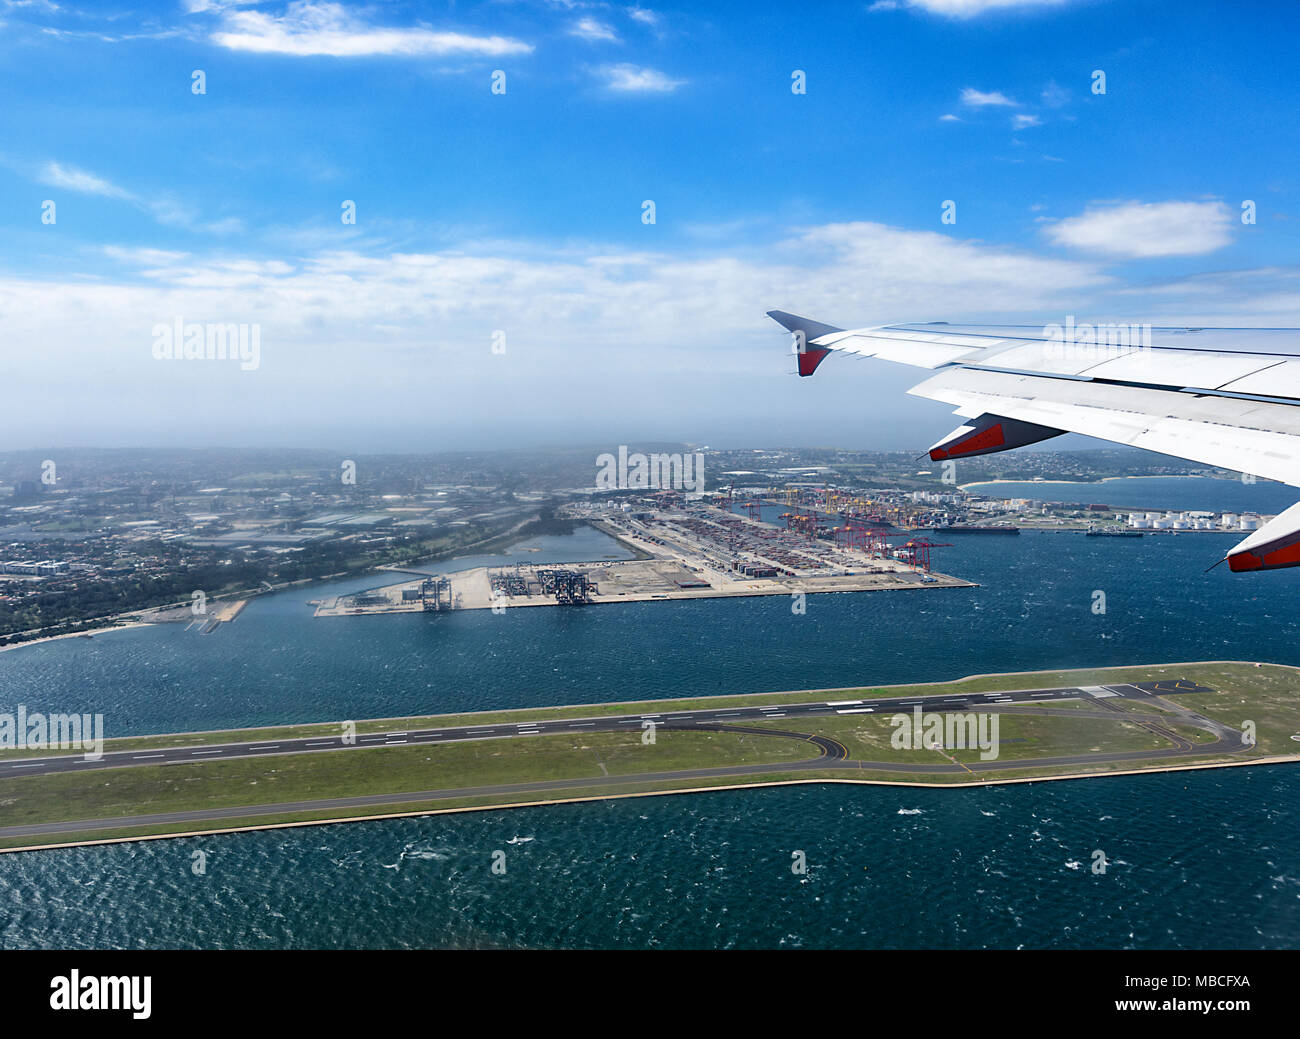 Aerial view of the Sydney Airport runway built over the sea, Australia Stock Photo